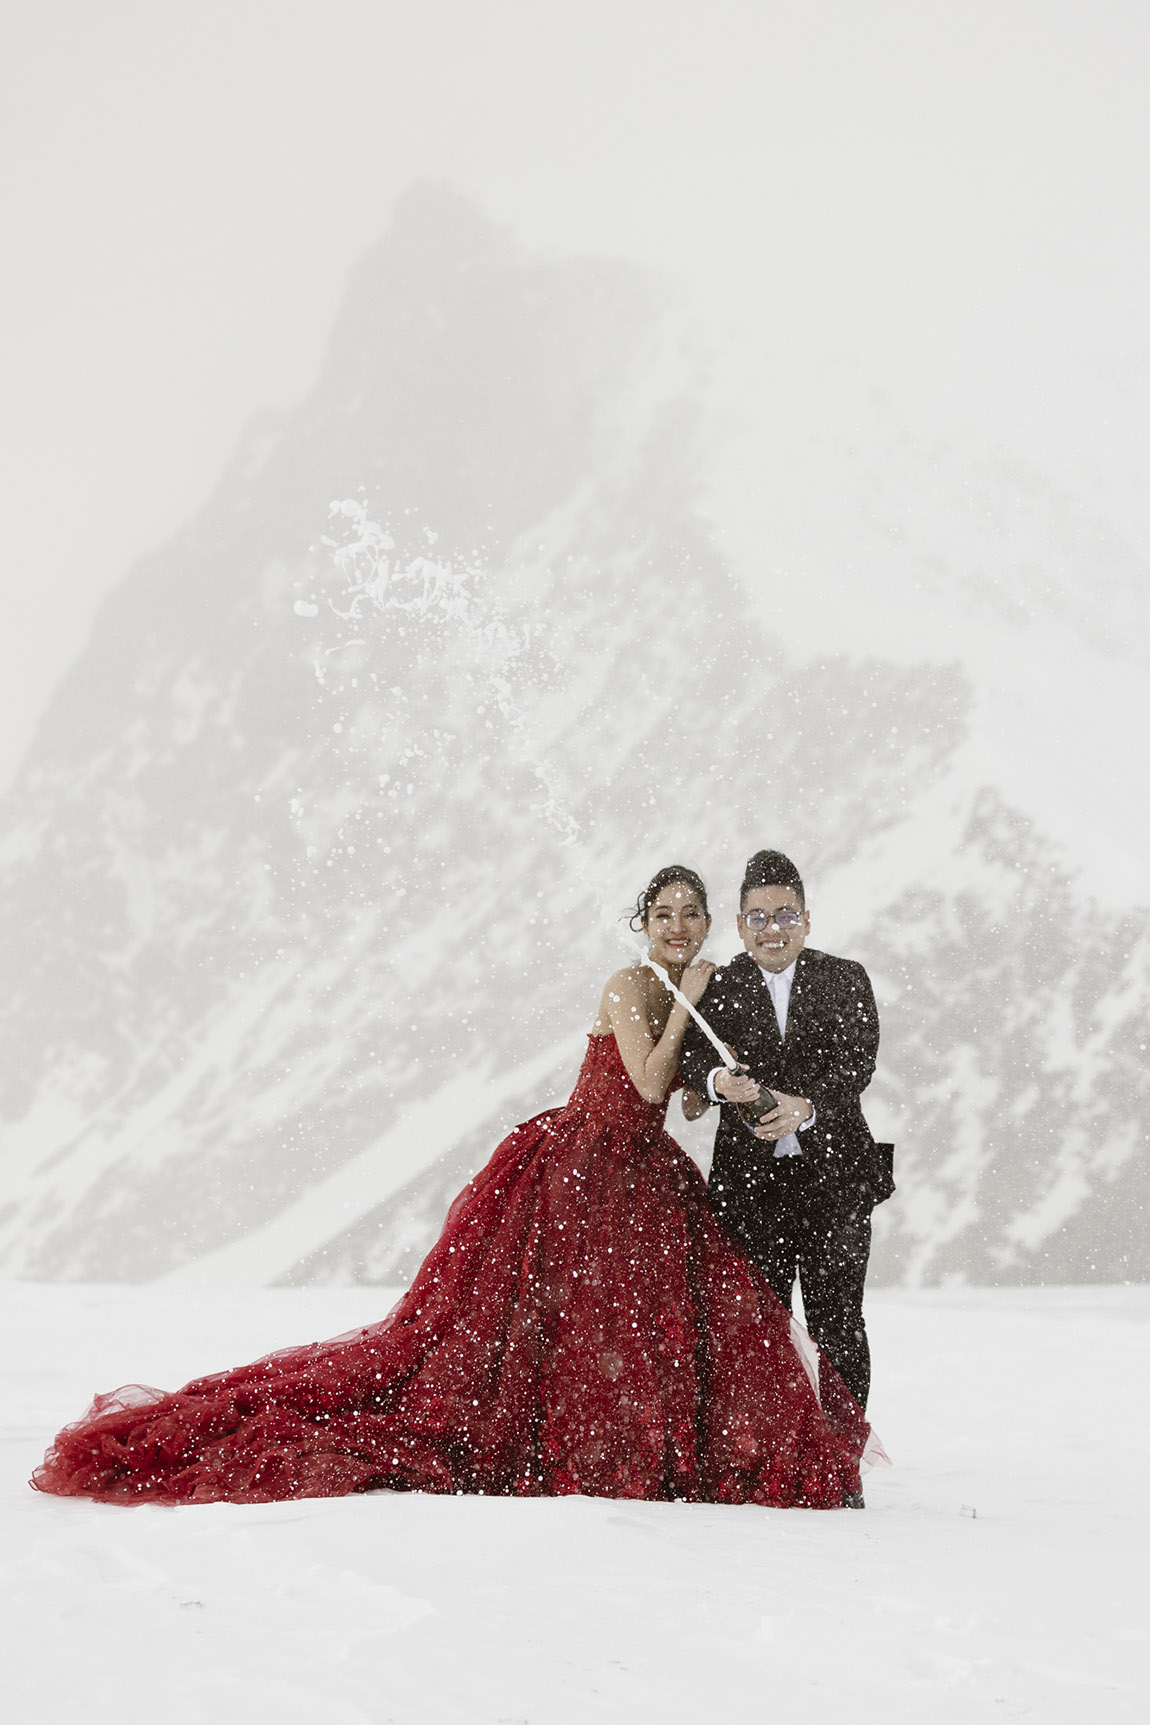 MA LOVE photography: UNFORGETTABLE MOUNTAIN ELOPEMENTS IN SWITZERLAND